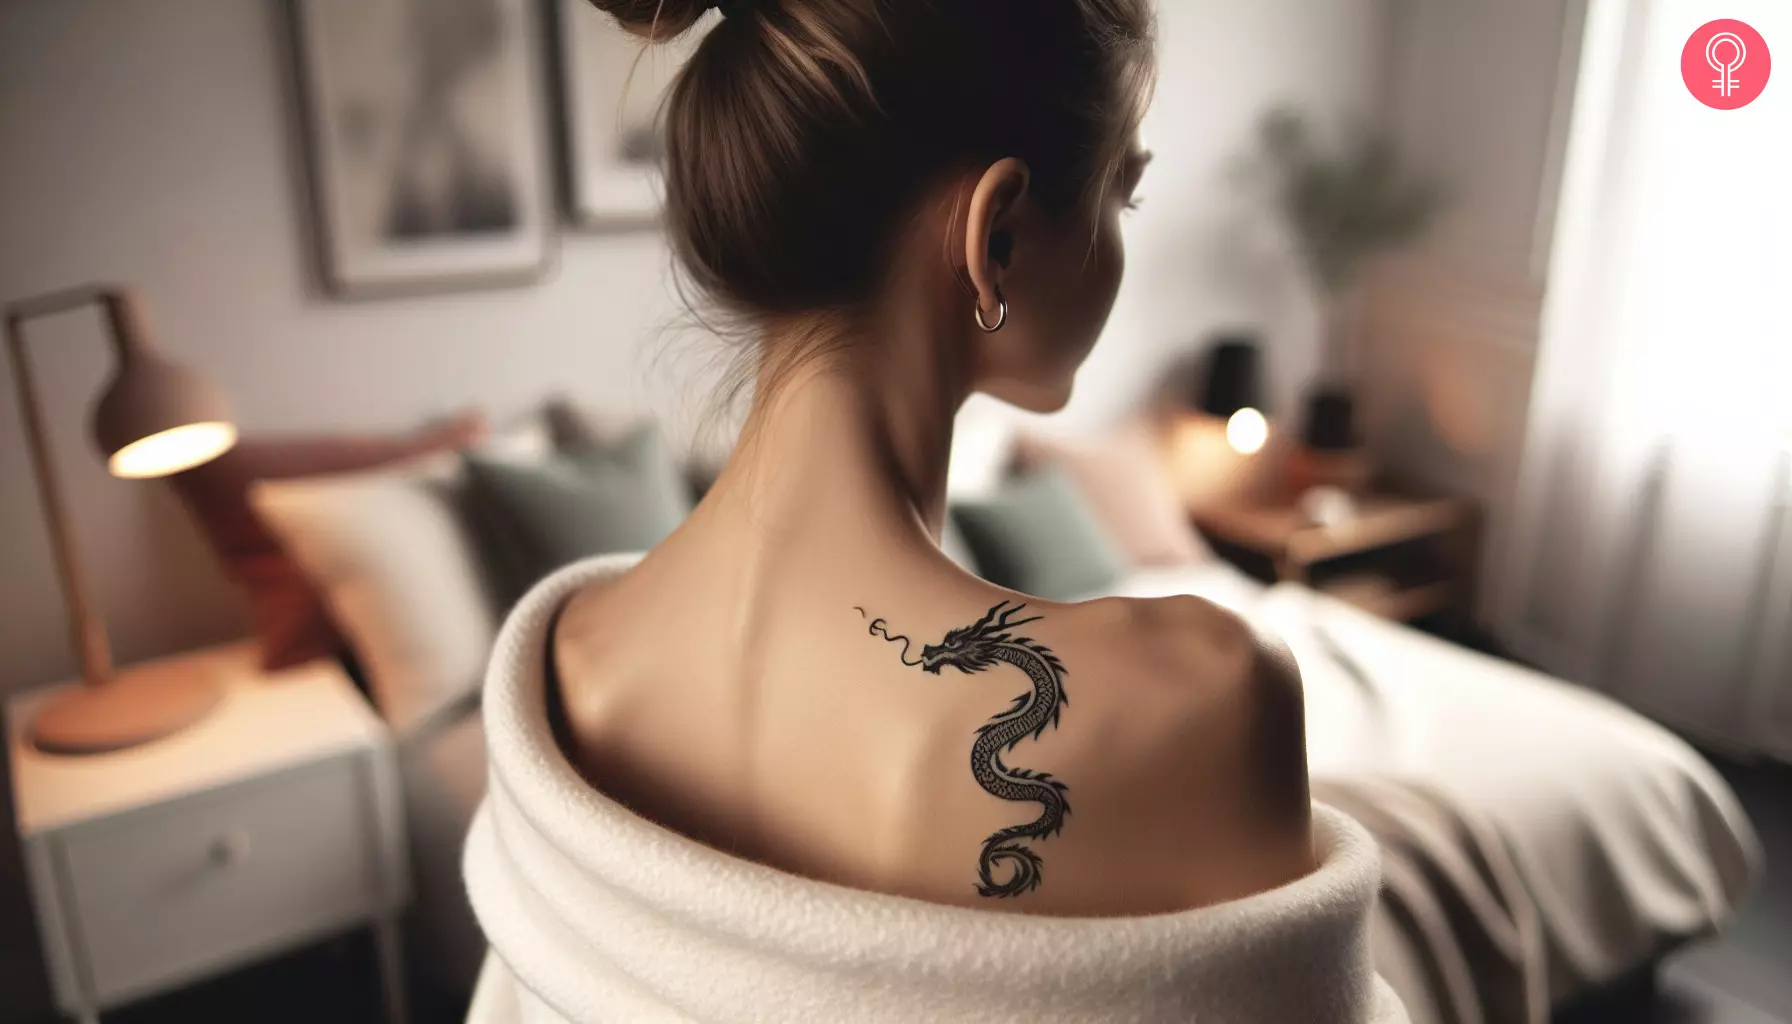 A small dragon tattoo on the shoulder of a woman